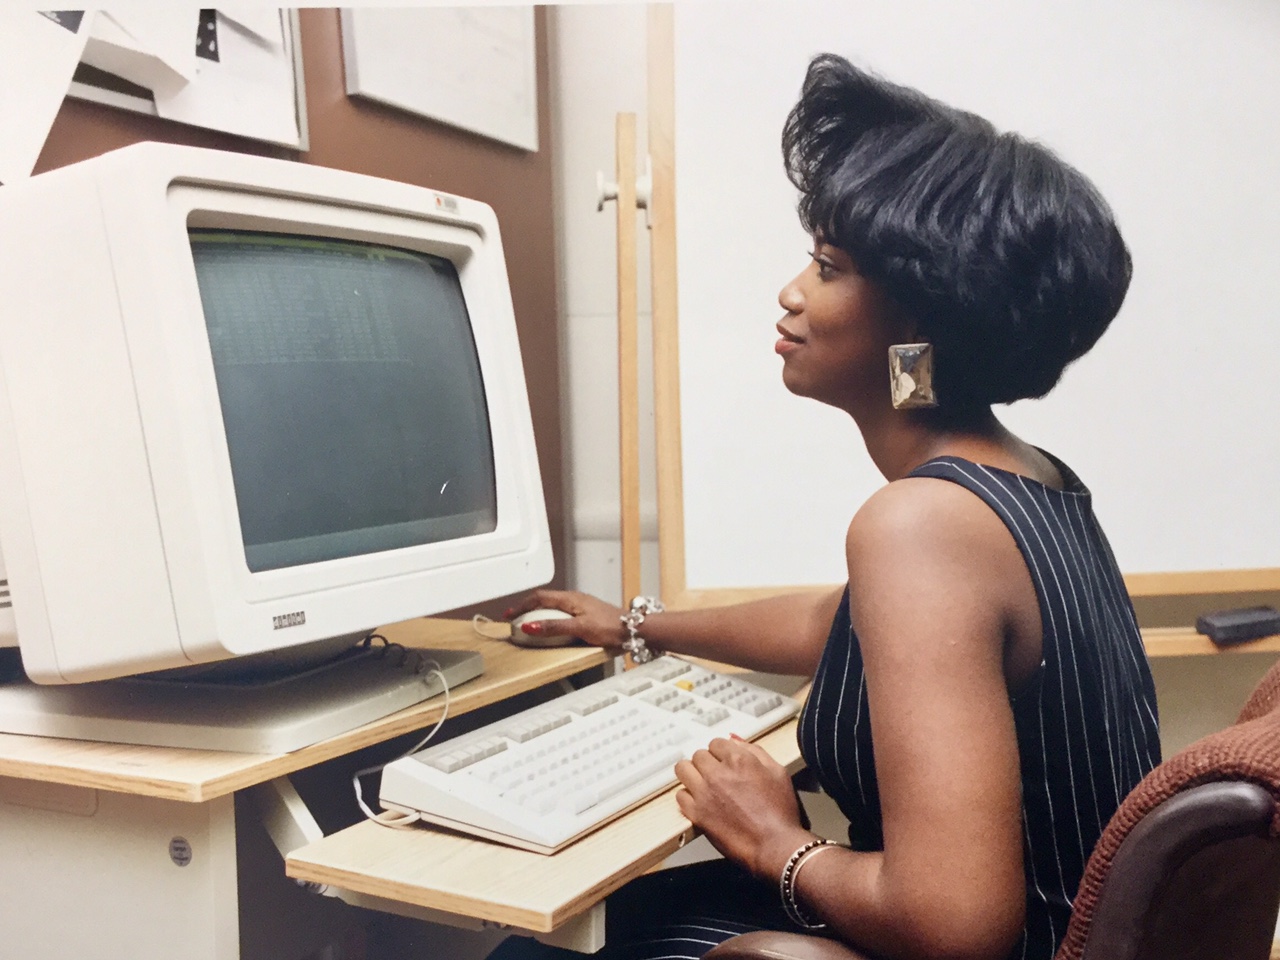 Cozette Parker, with elegant hair, earrings, and dress, is sitting at a desk, facing an old-style, massive-sized computer from the 1990s, her hand on the mouse, and a cheerful smile on her face.